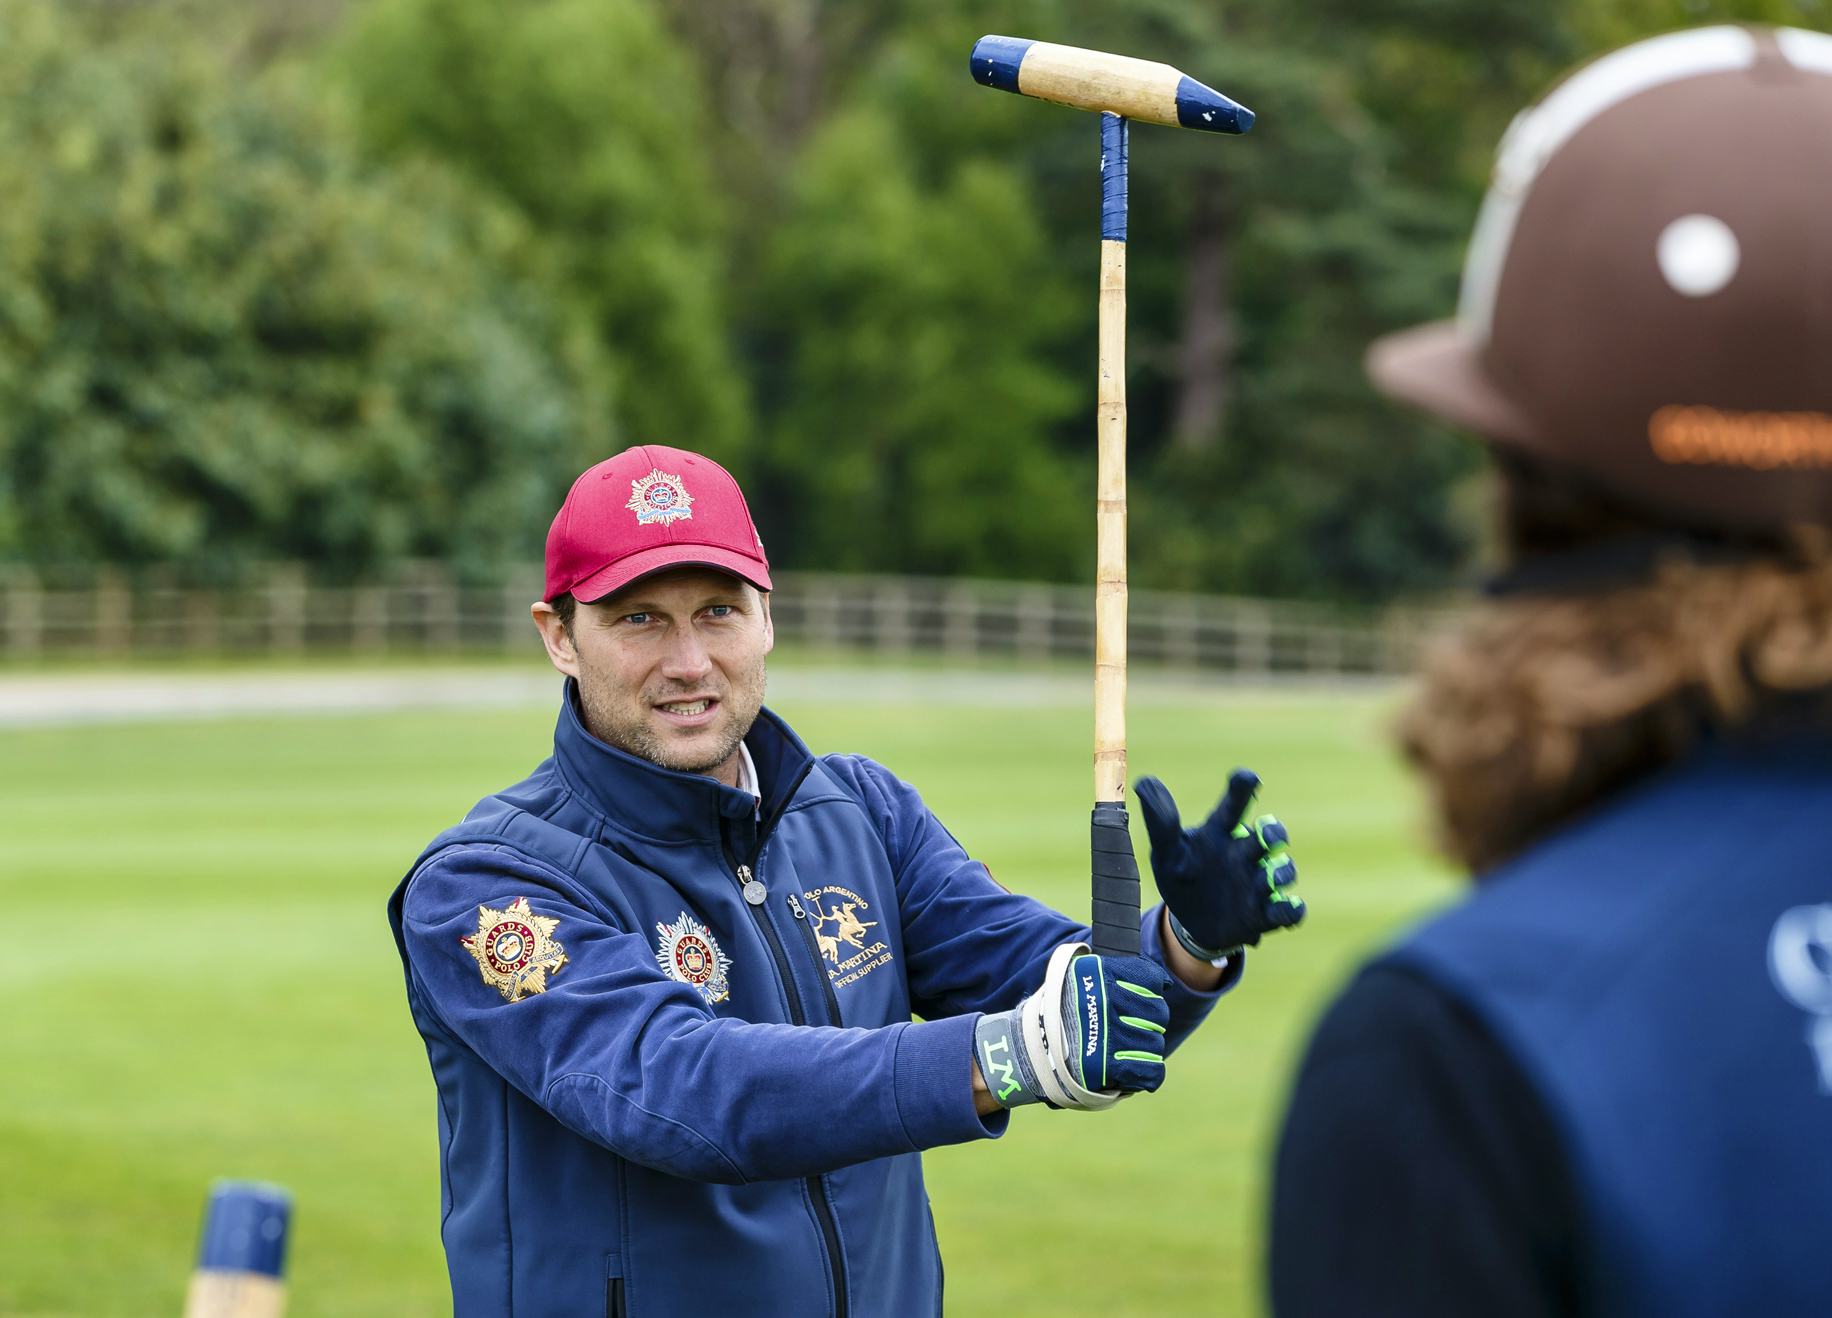 Teambuilding Guards Polo Academy masterclass at Coworth Park - credit miles willis